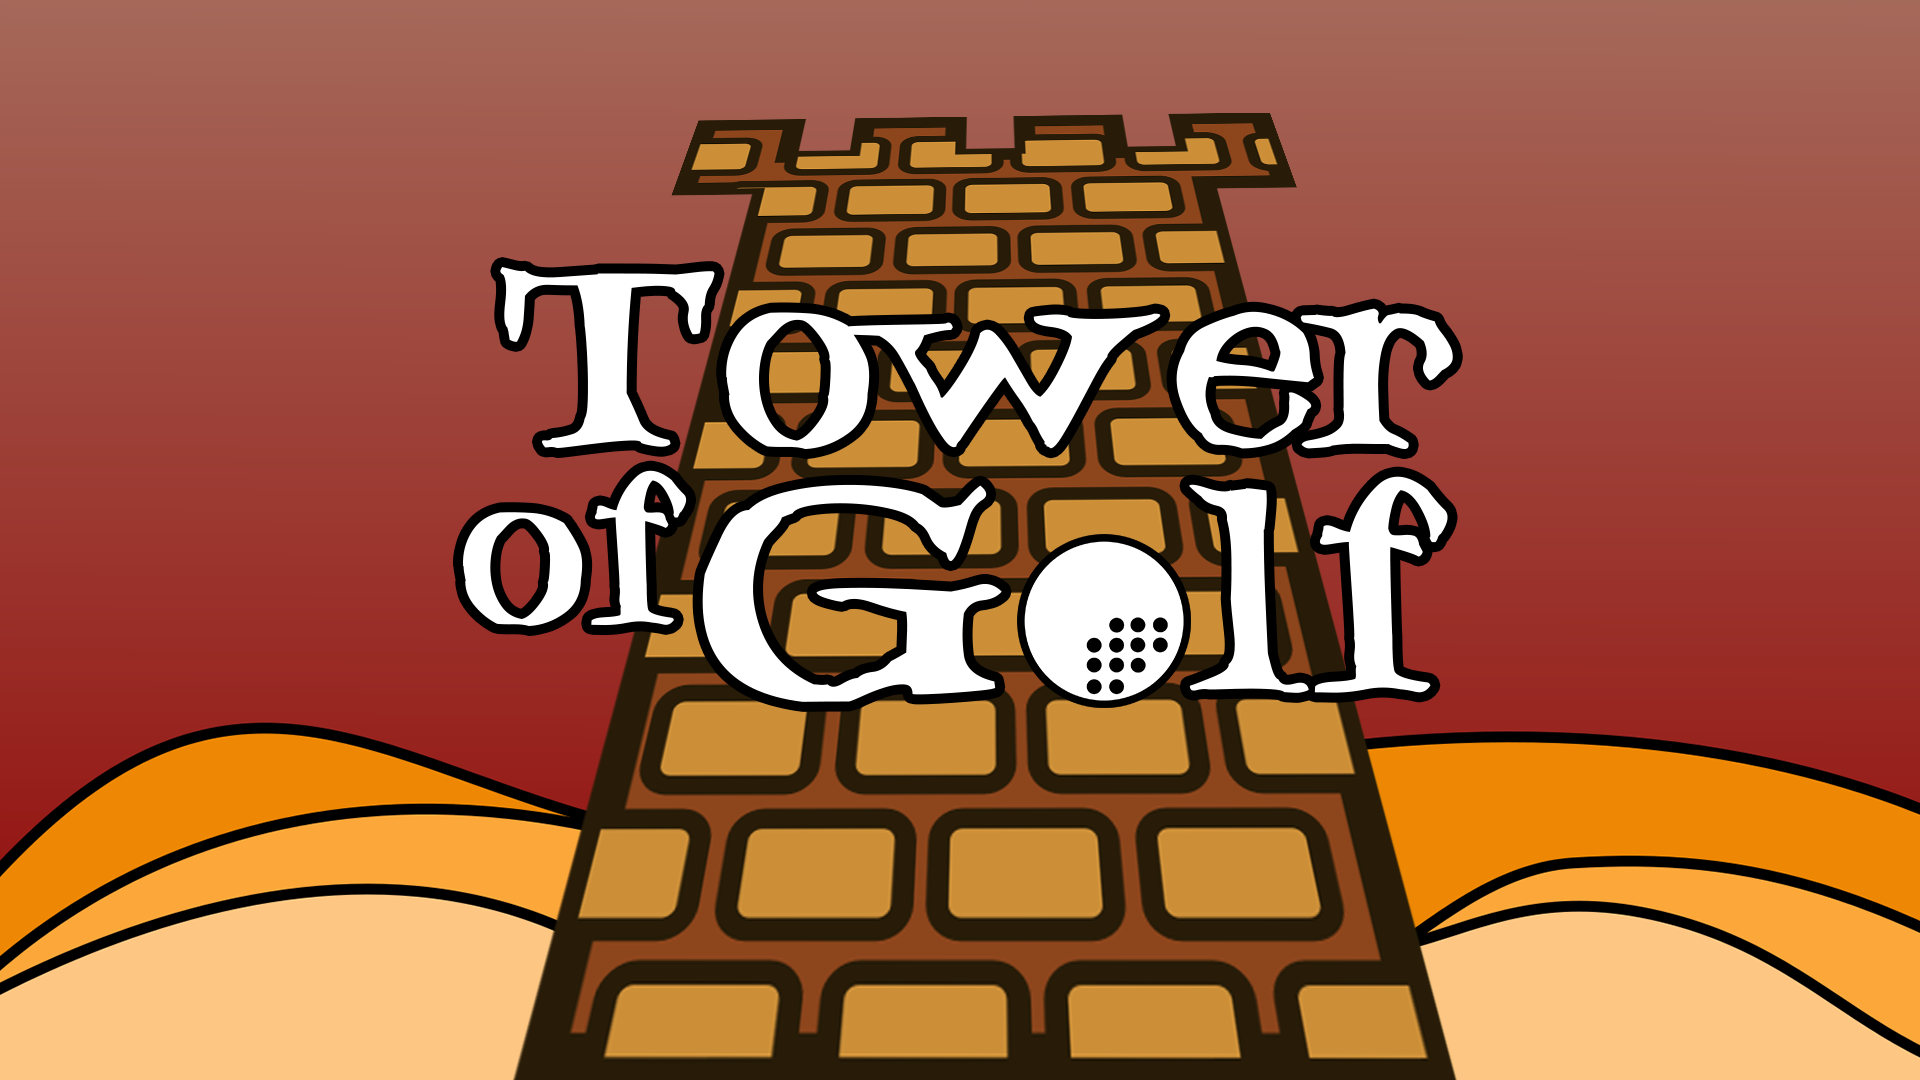 Tower of golf